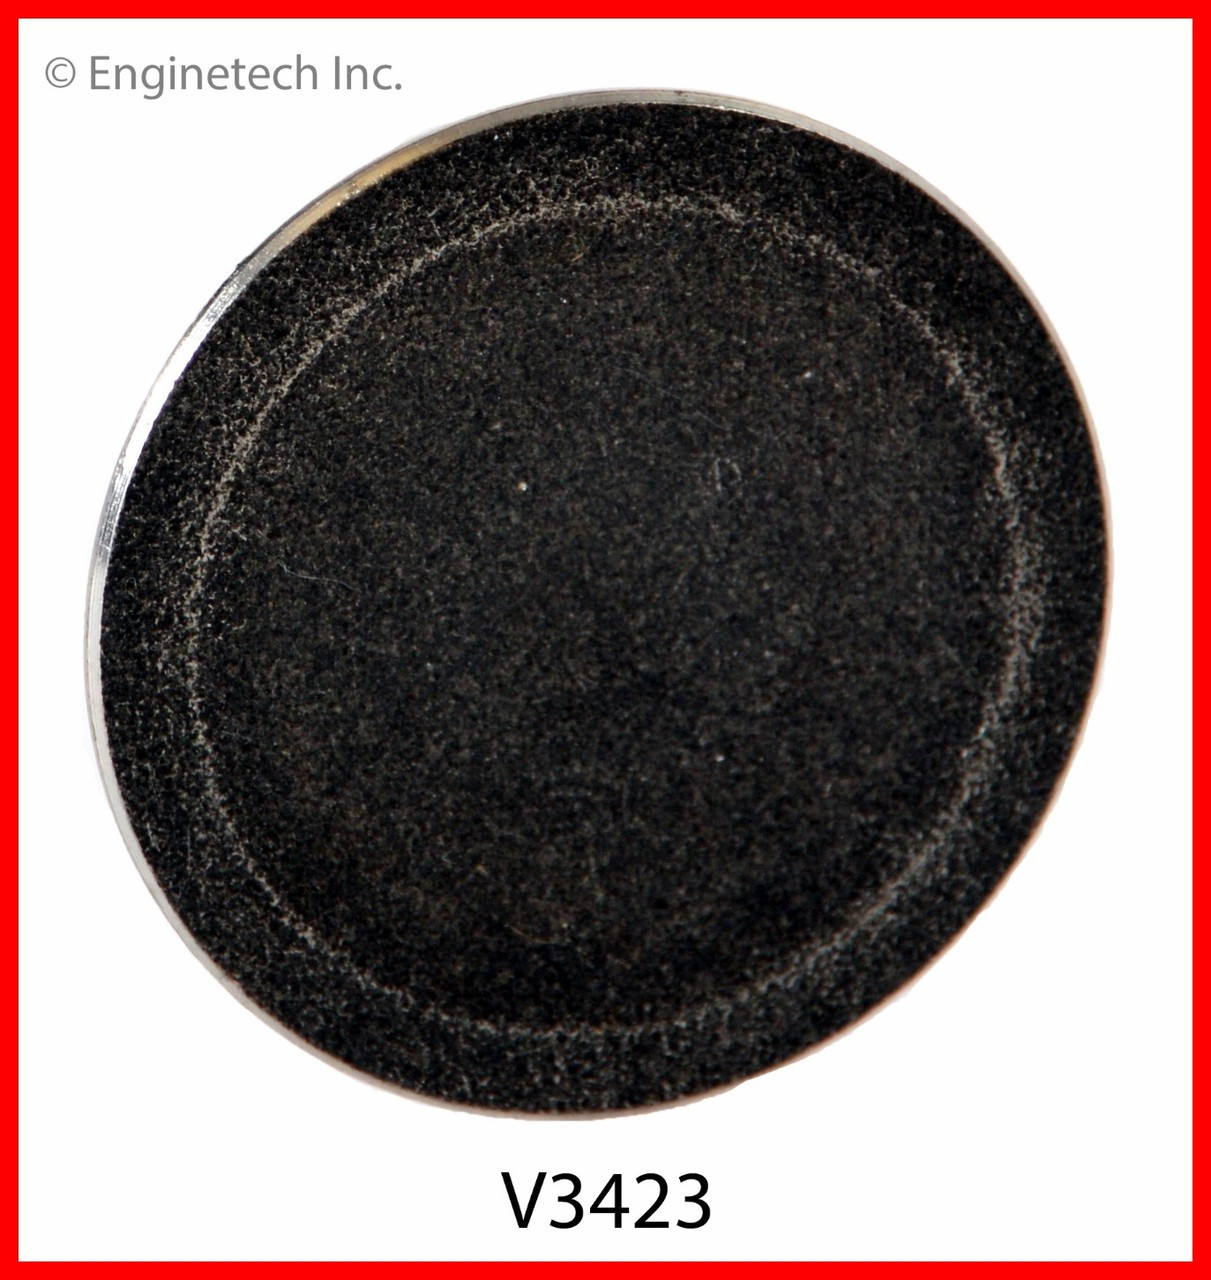 Exhaust Valve - 2007 Ford Freestyle 3.0L (V3423.F56)